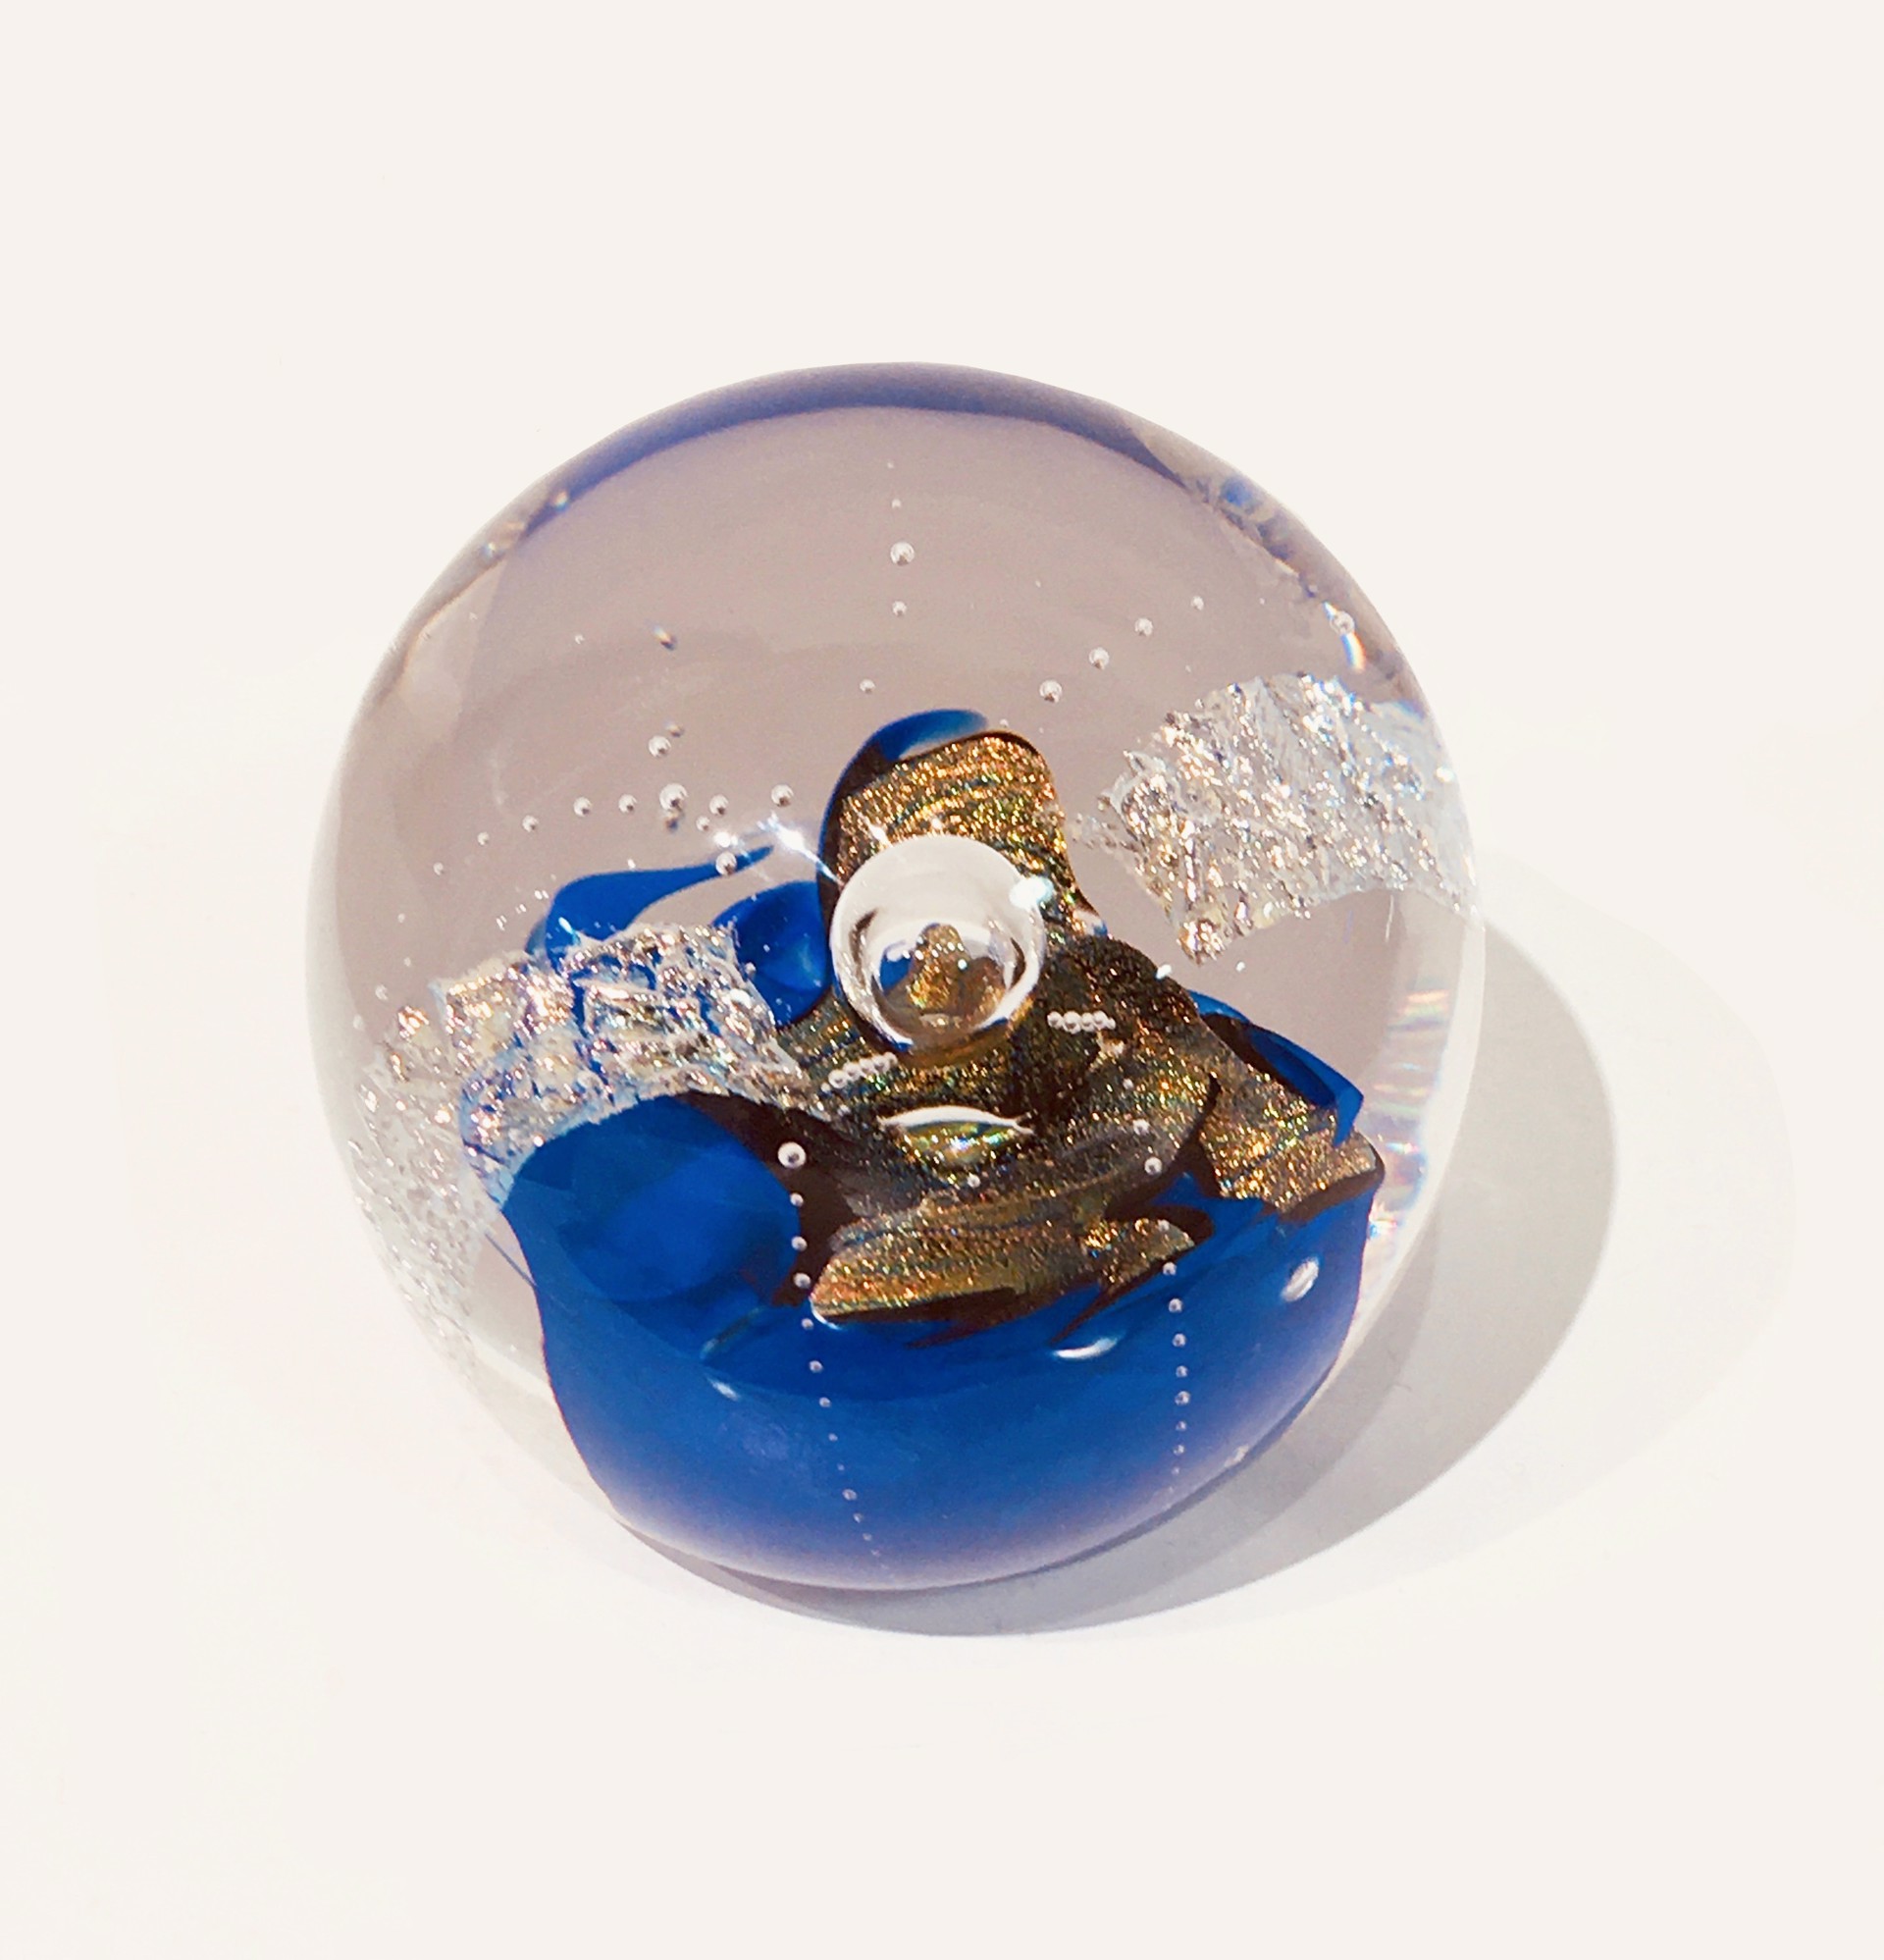 Paperweight by Elaine Hyde